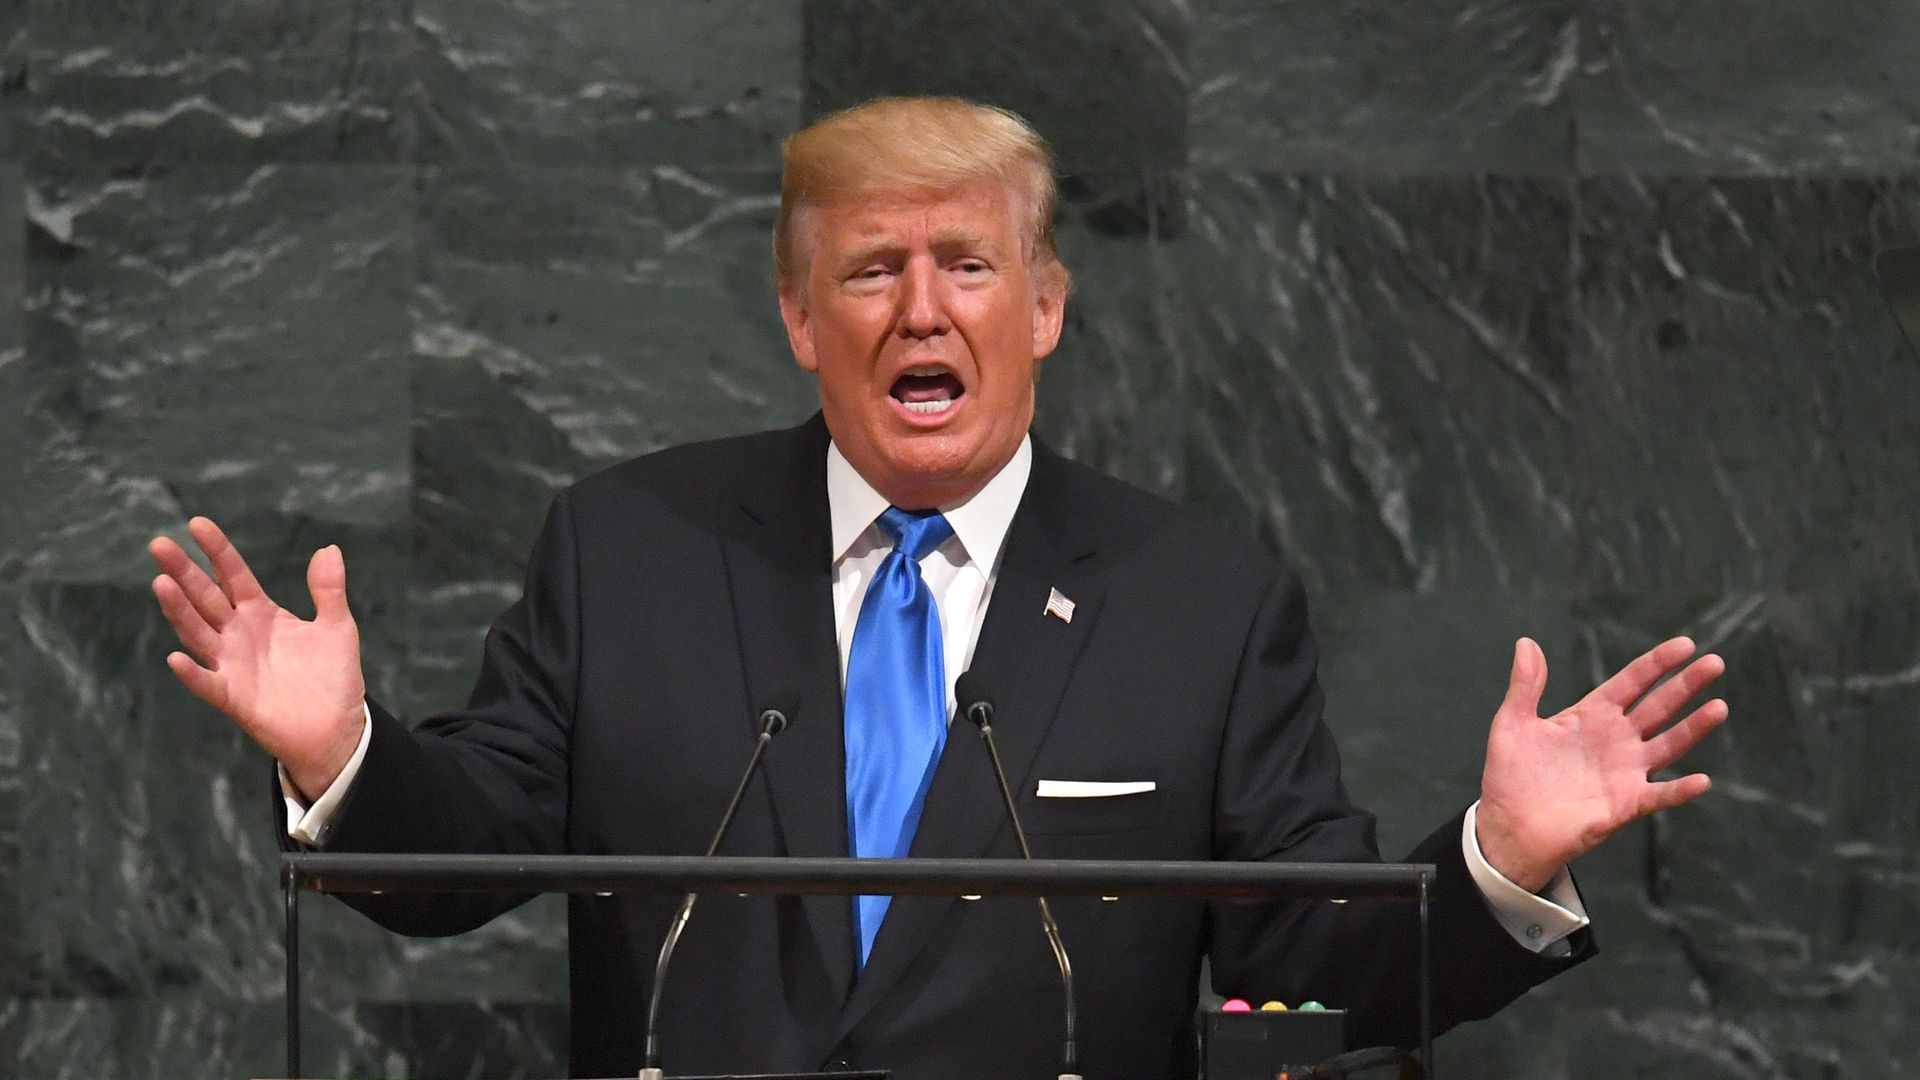 President Donald Trump addresses the 72nd Annual UN General Assembly in New York on September 19, 2017. 